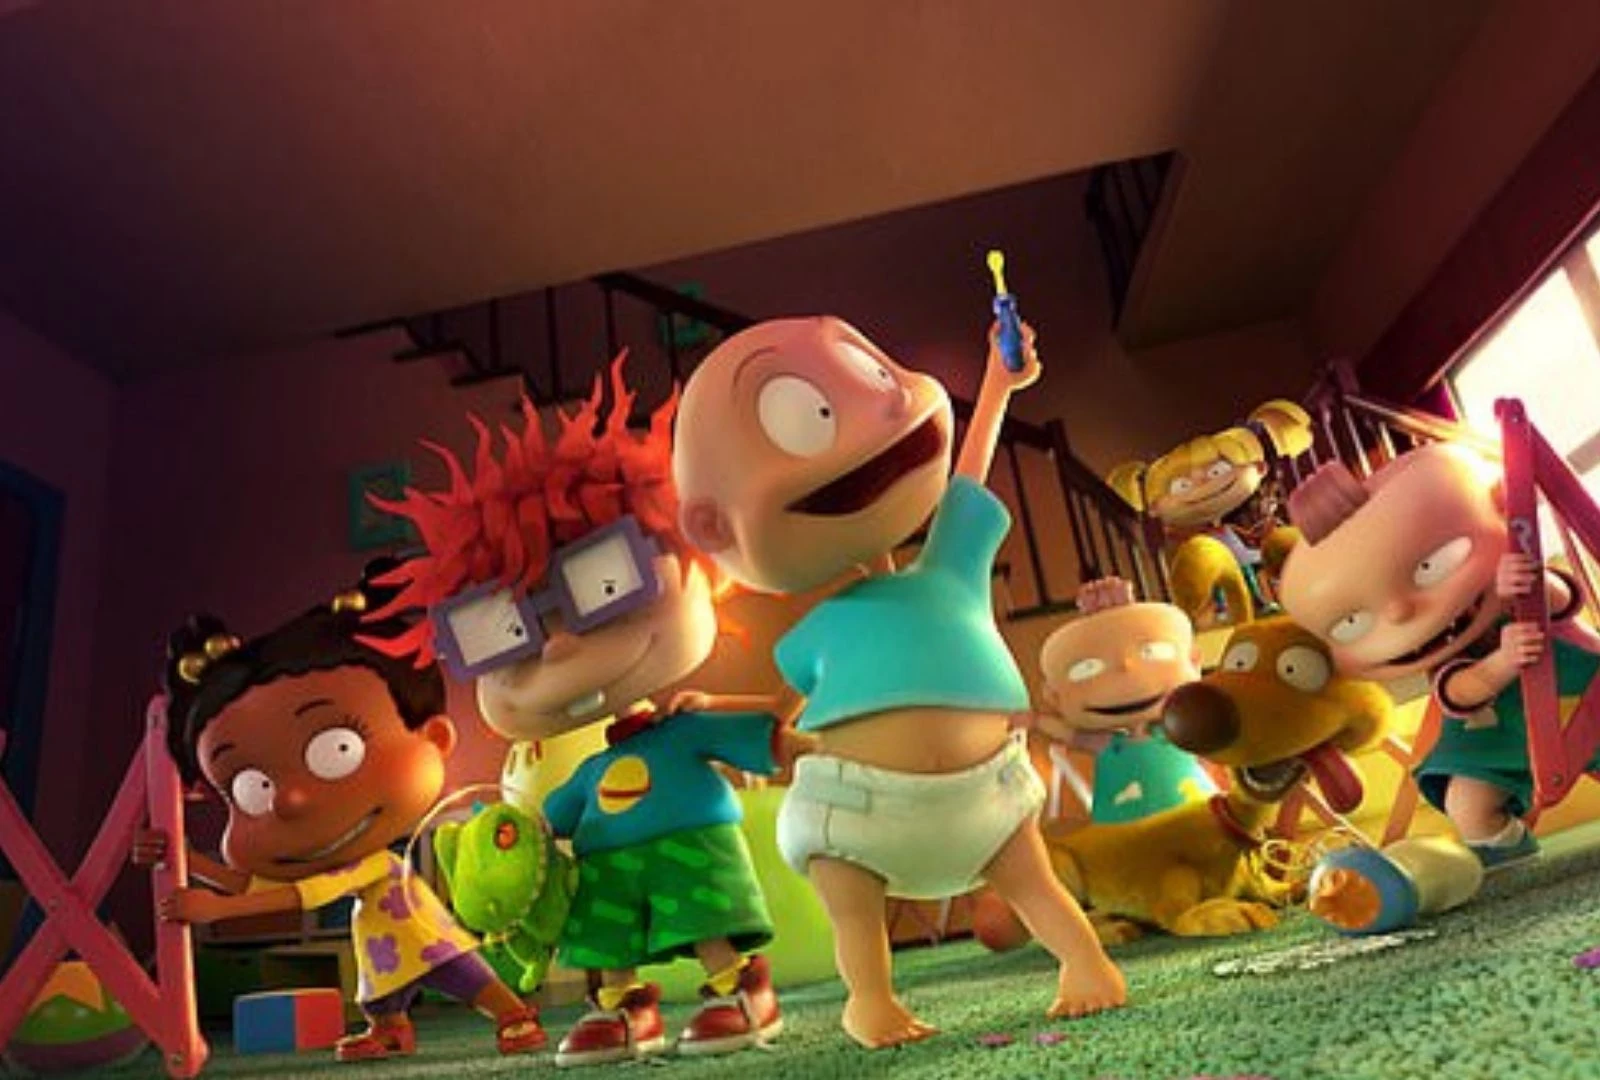 The Rugrats Return In First Trailer For Their Revival Series